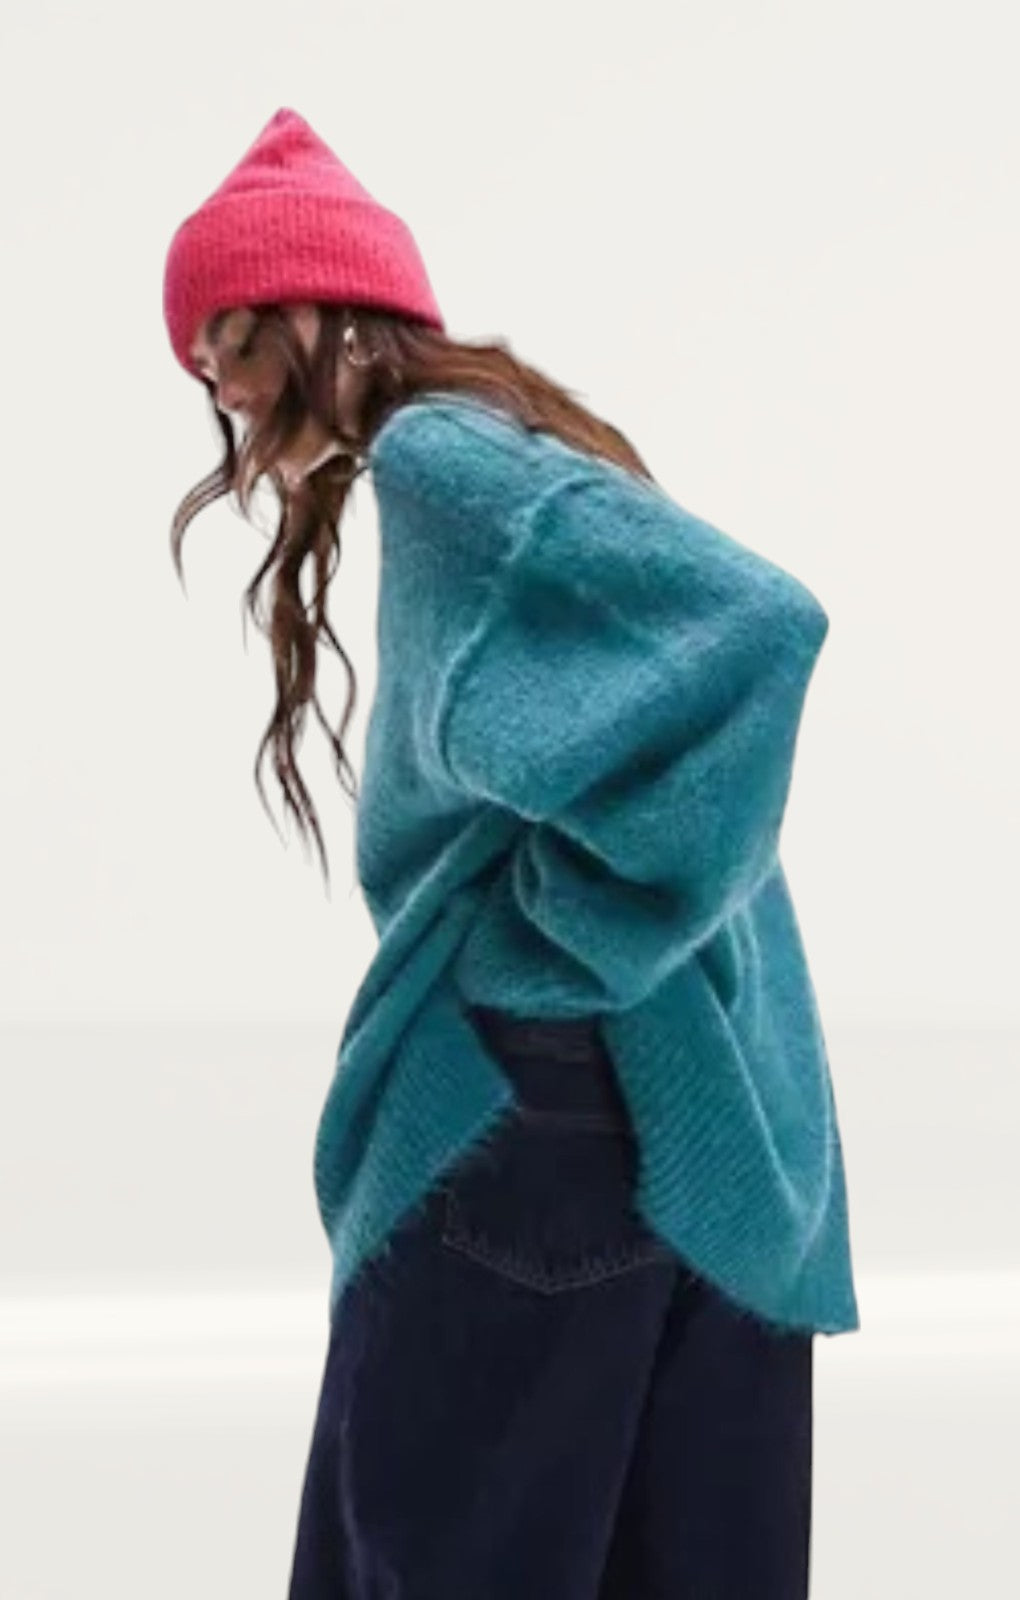 Topshop Knitted Longline Exposed Seam Fluffy Crew Neck Jumper in Teal product image